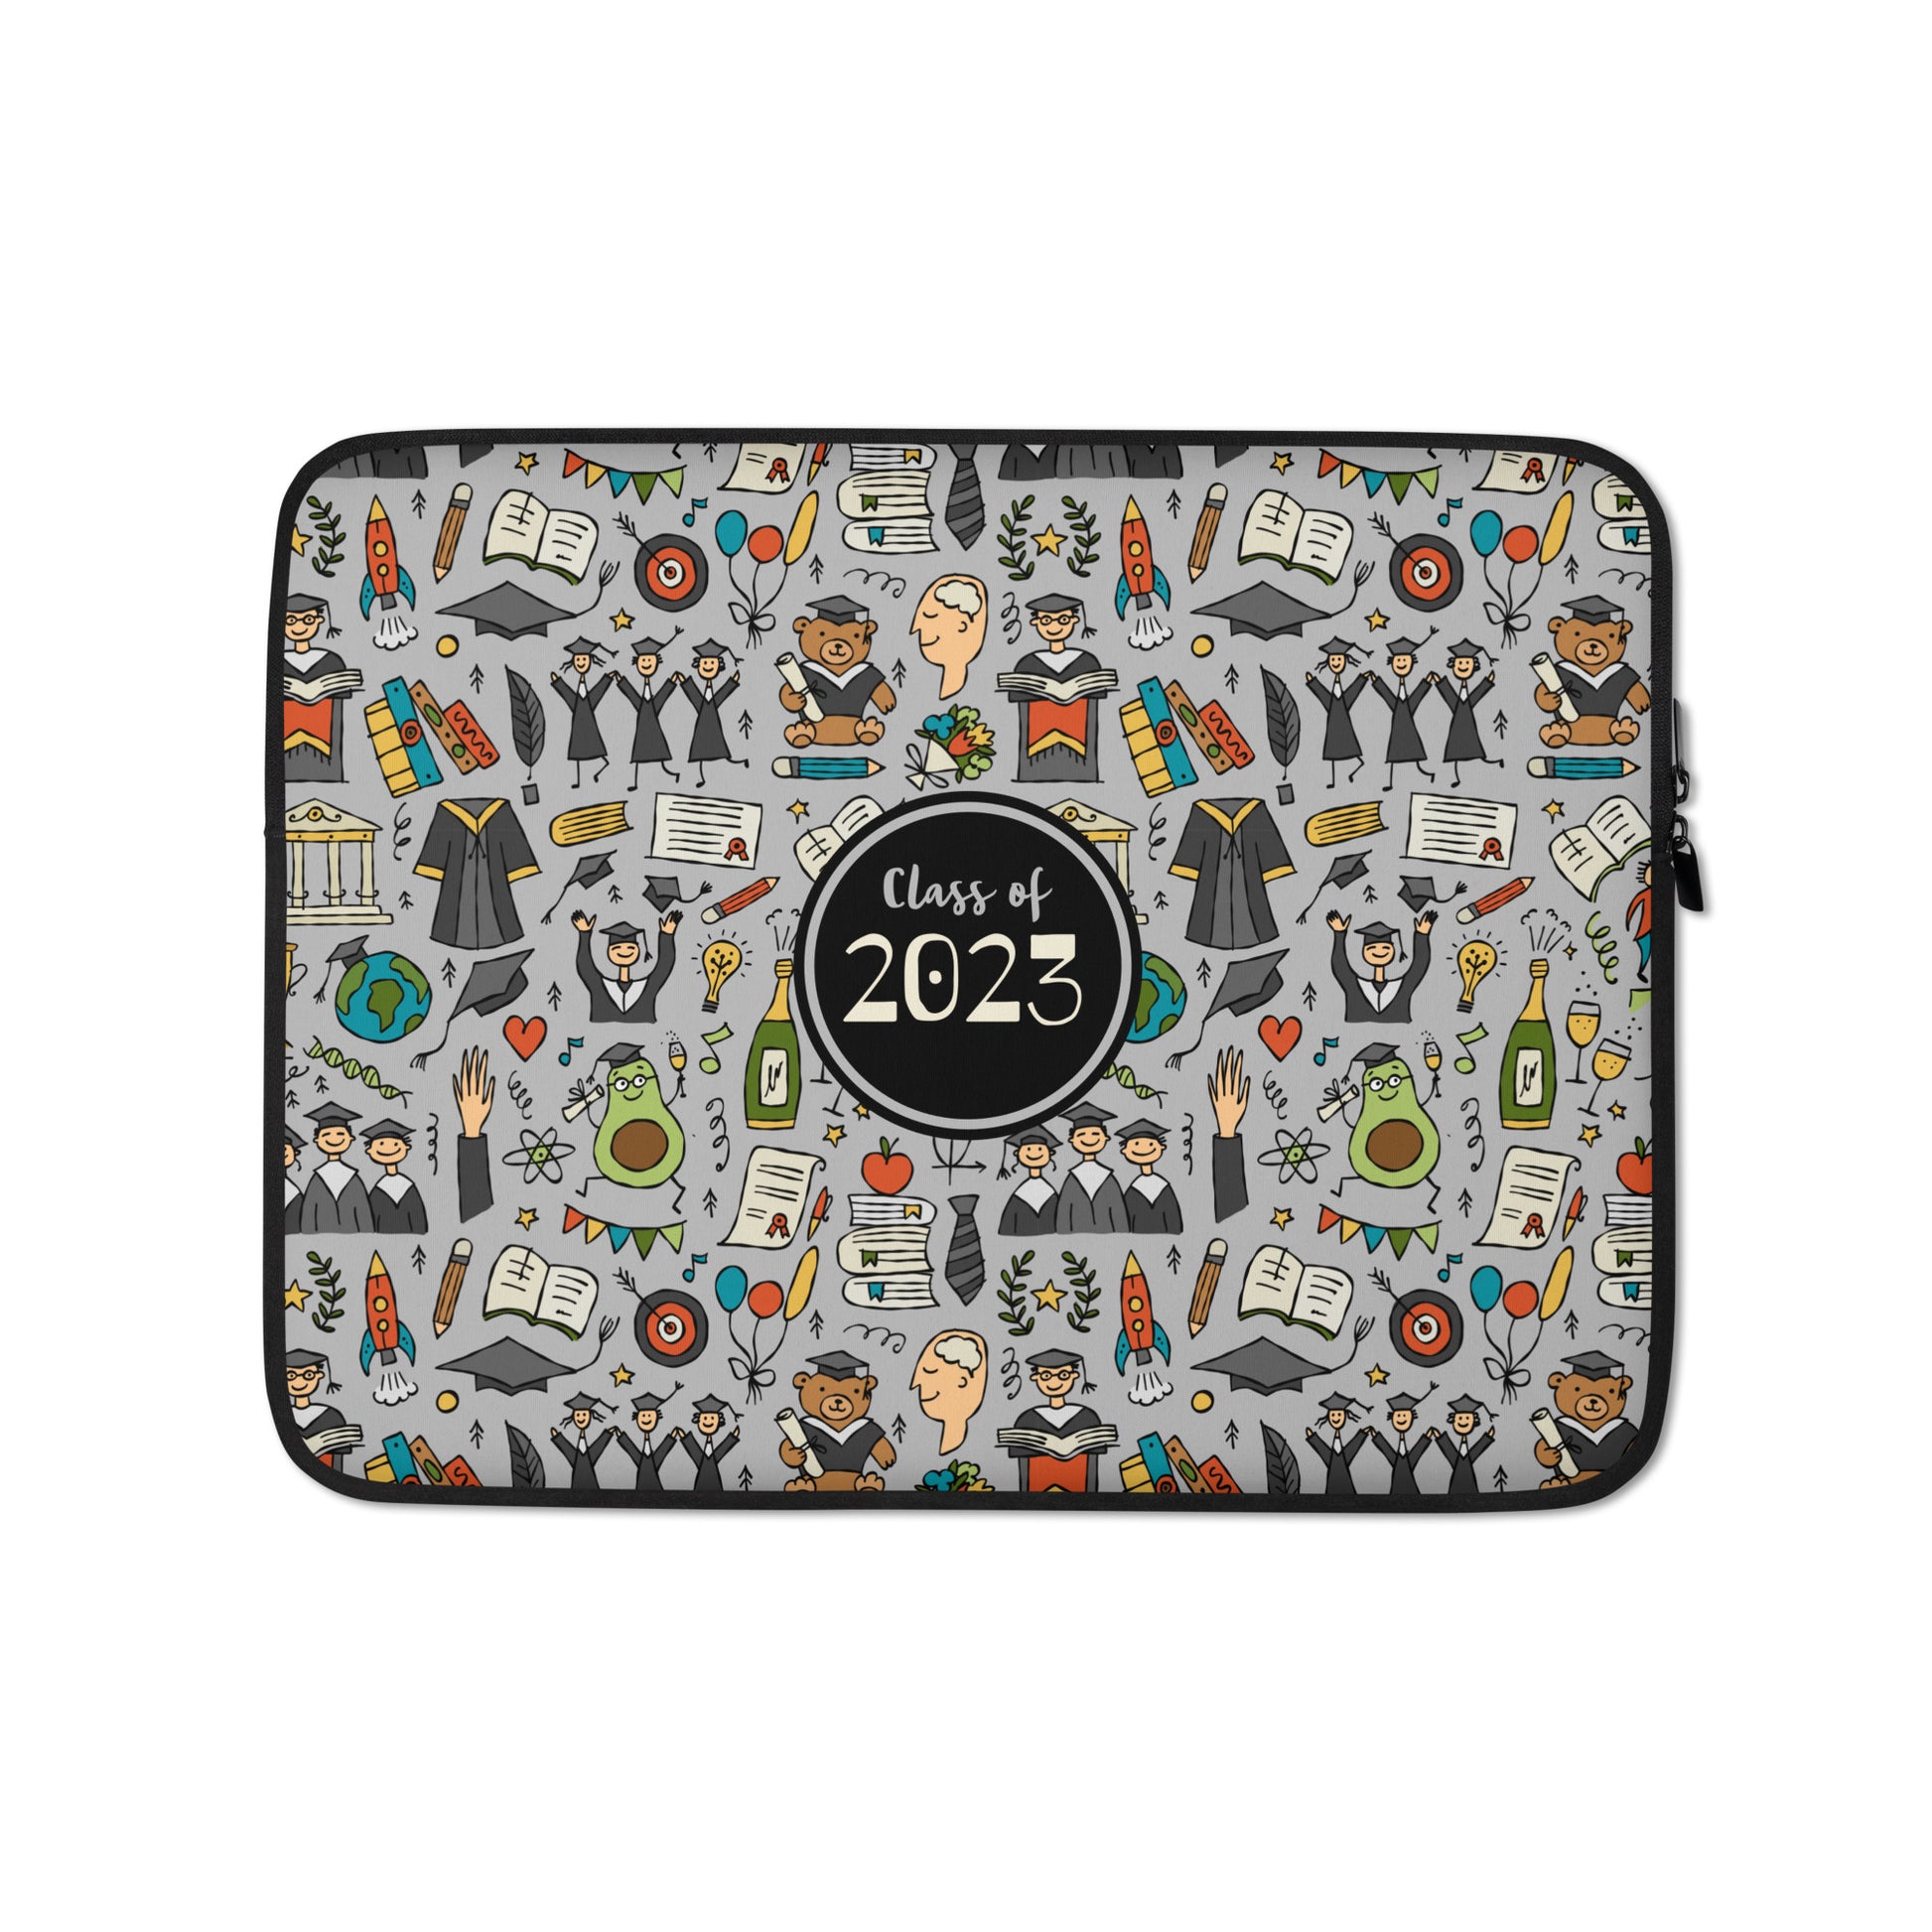 Personalized graduation laptop sleeve 13" dark grey color with funny designer print featuring graduates in hats and mantles, school-themed motifs, celebration designs, and a graduation teddy bear. 